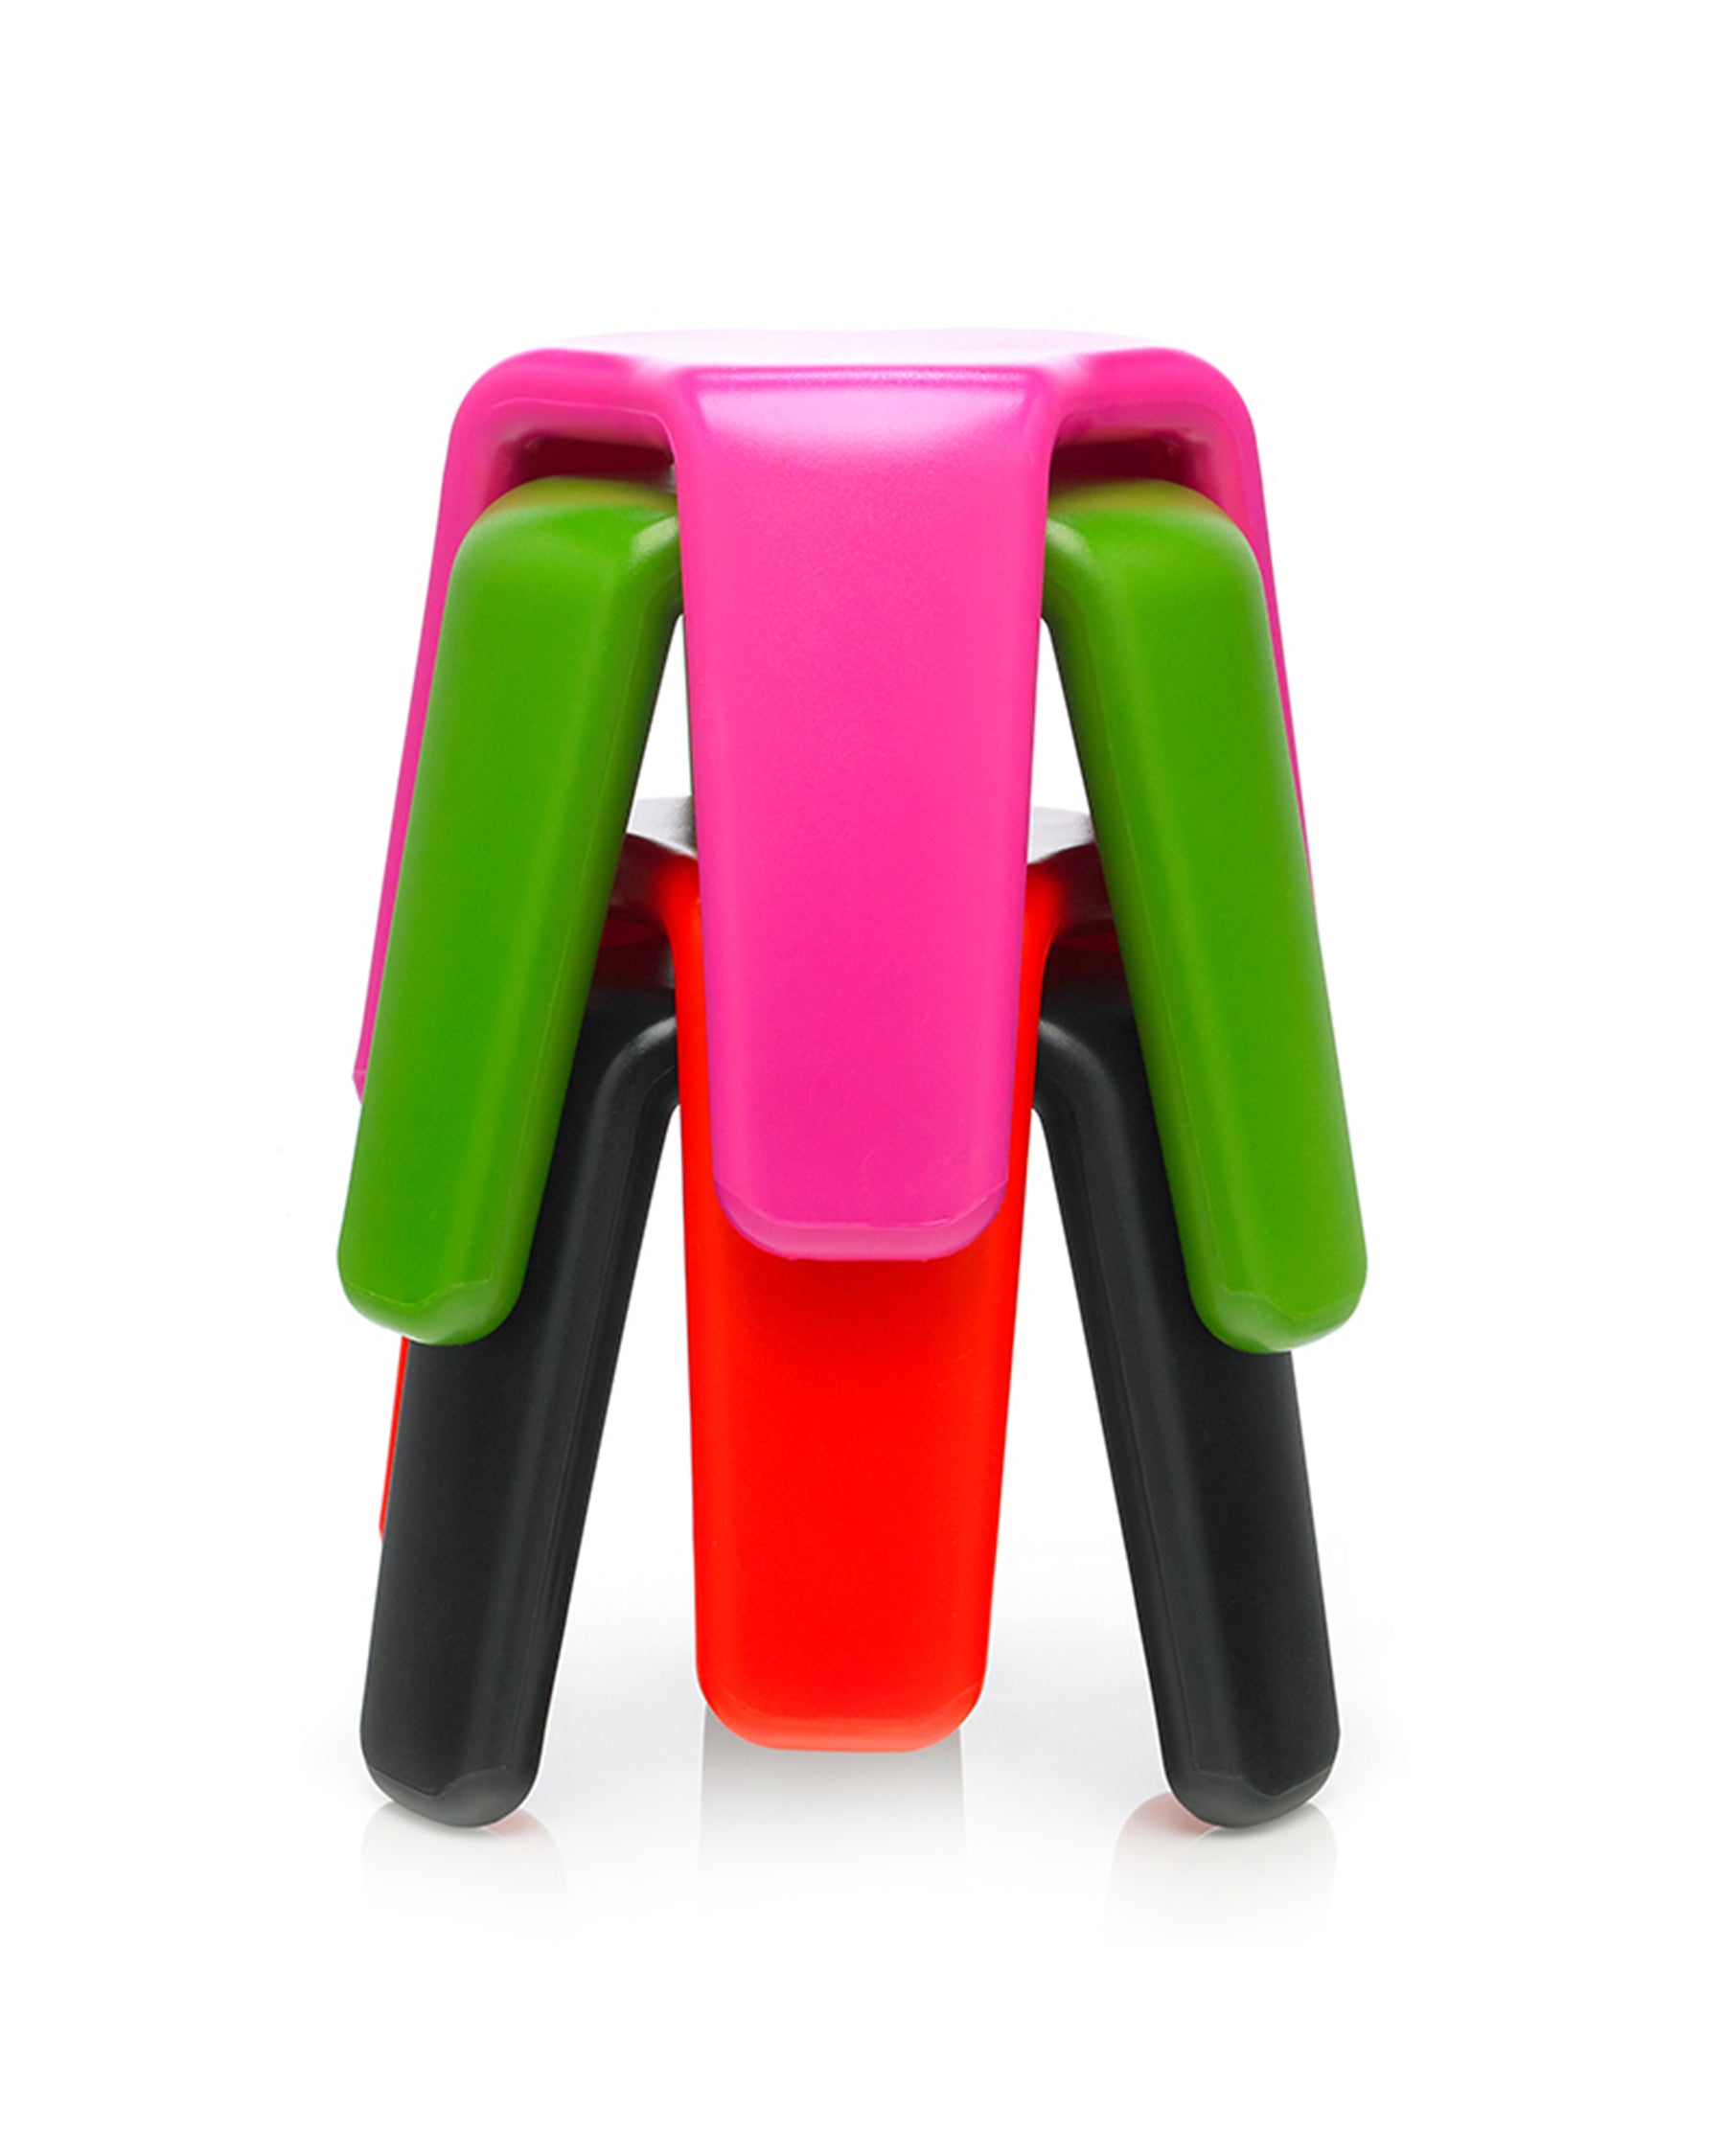 Designed by Ben McCarthy for Go Home, the Launch Junior stool is the ultimate colourful kids seat.  Stackable, indestructible, and UV resistant the stools offer a stylish, modern design to complement any residential or childcare environment.